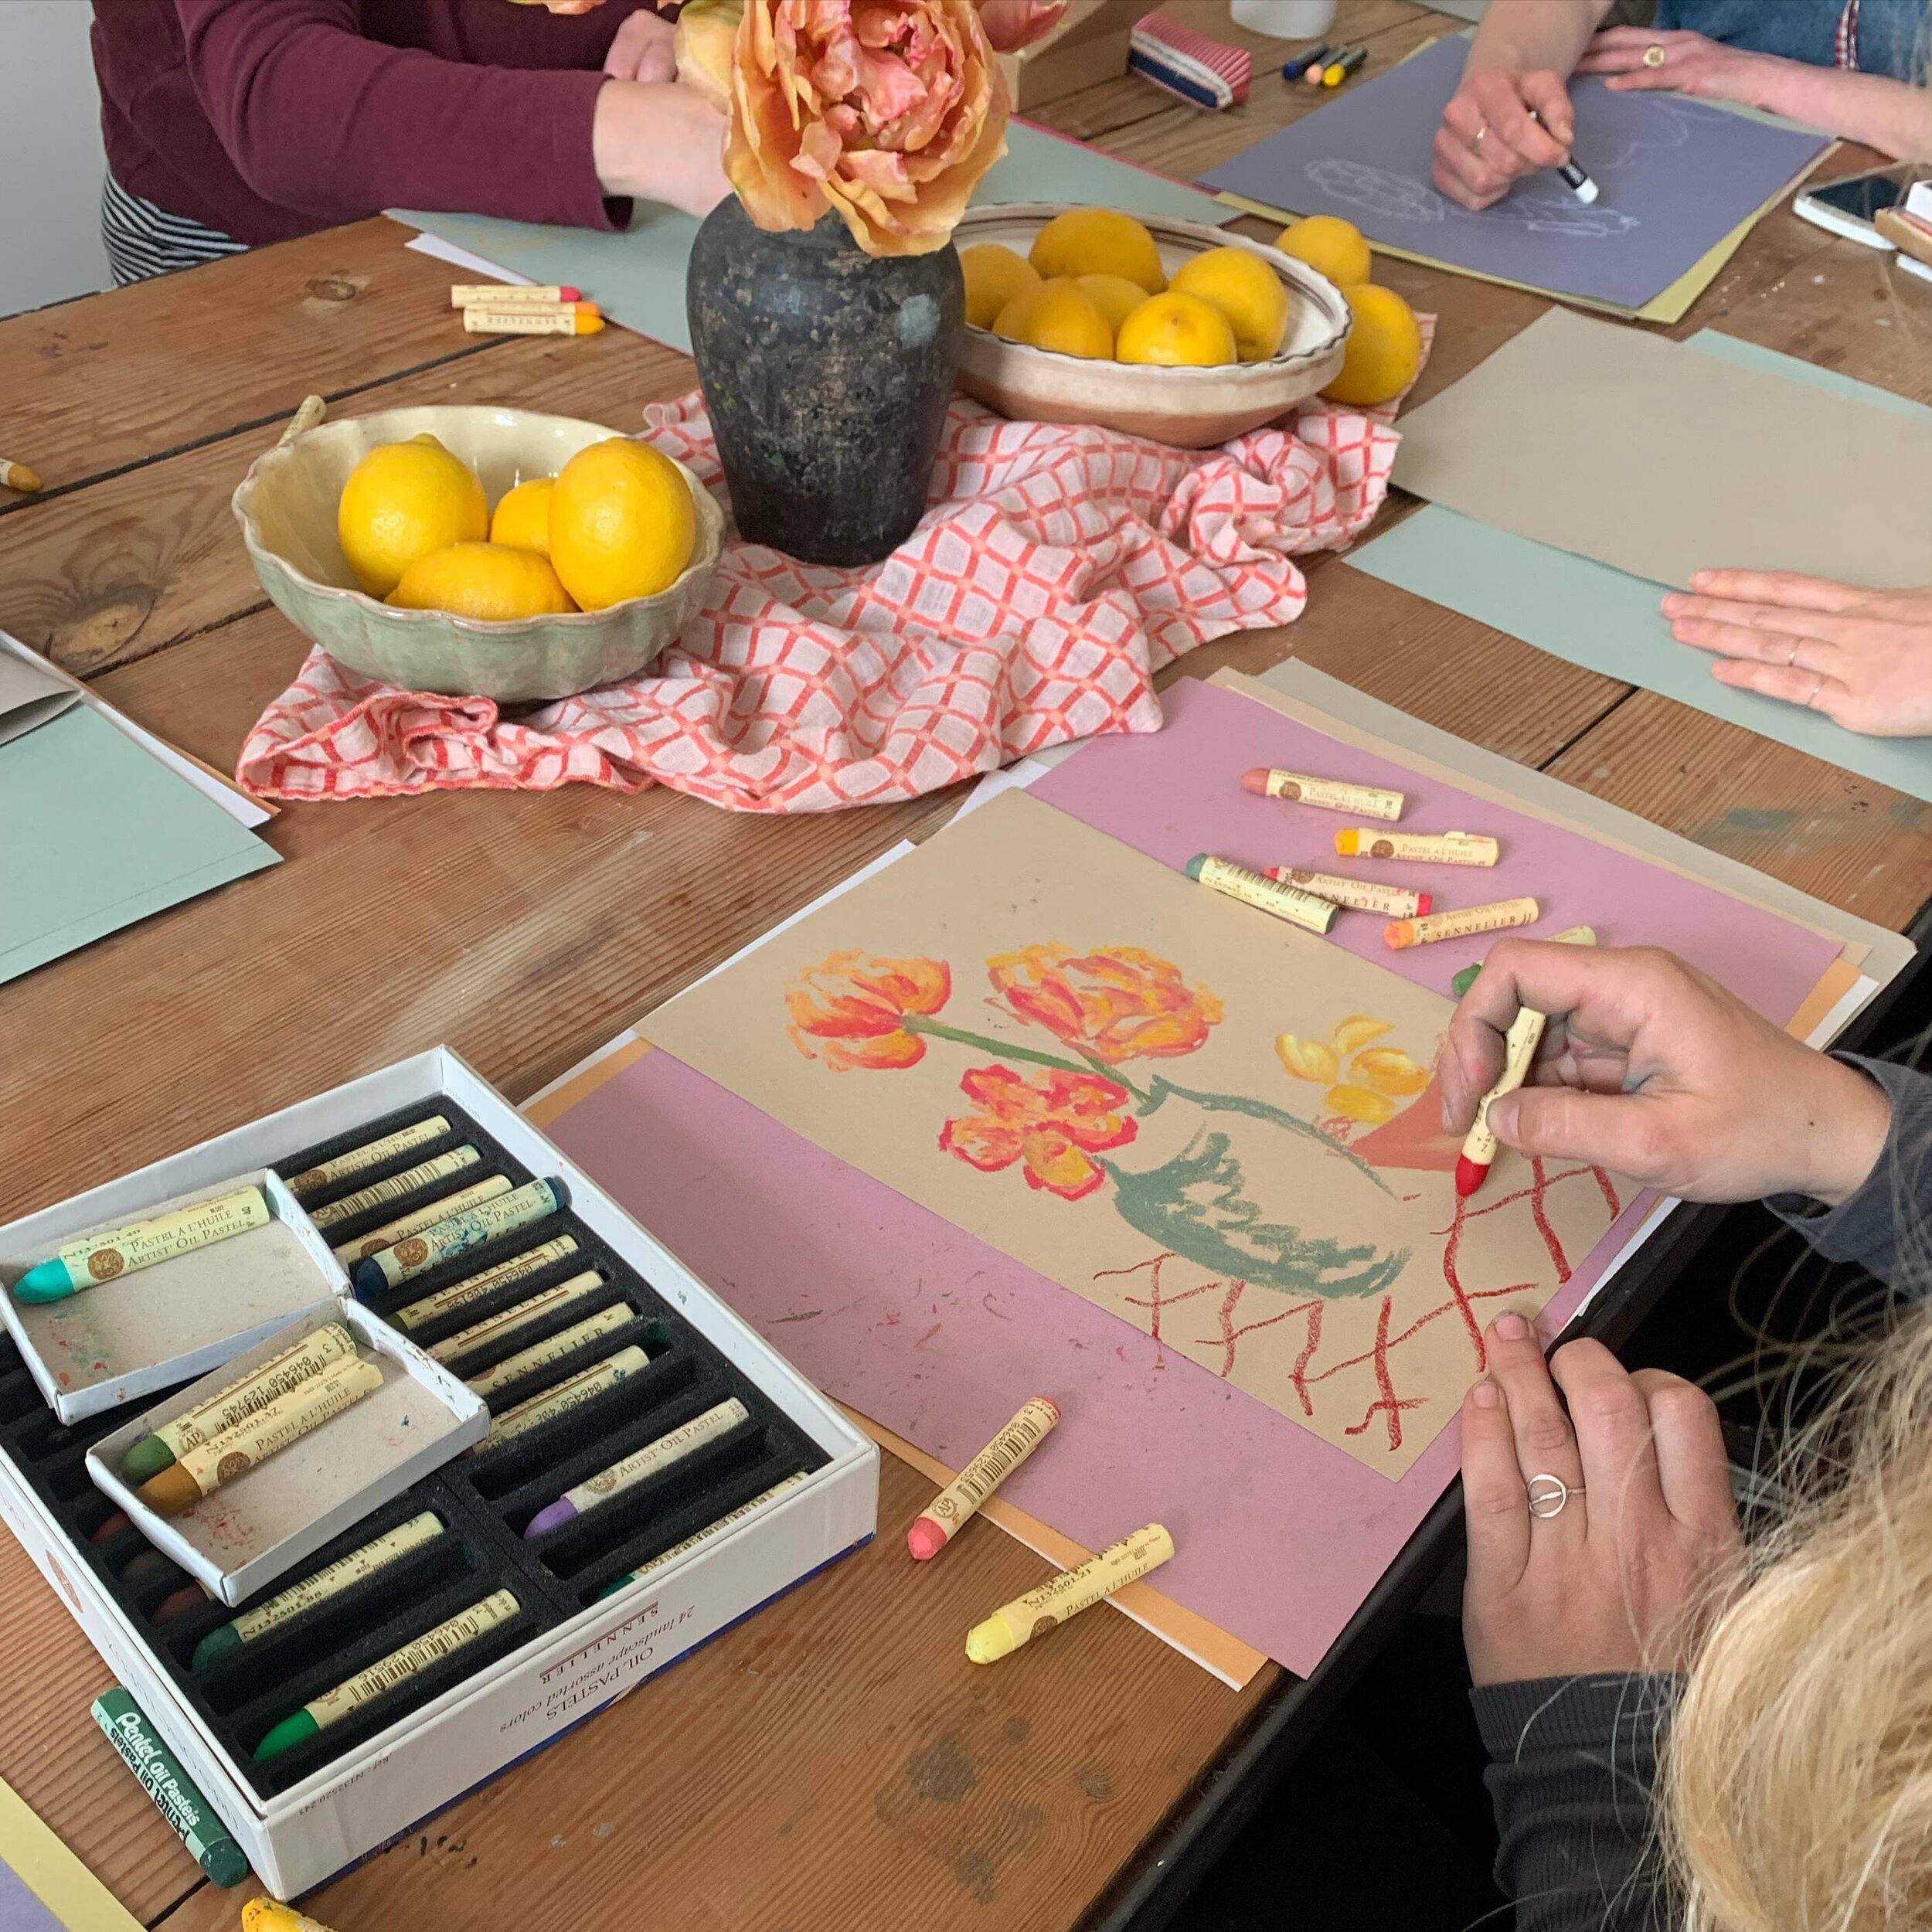 Art classes every month from your sofa? Yes please ✨

Join a STILL monthly subscription. We have two options to choose from&hellip;

Live &amp; pre-recorded subscription: 
For just &pound;10 a month, this monthly subscription gives you access to one 